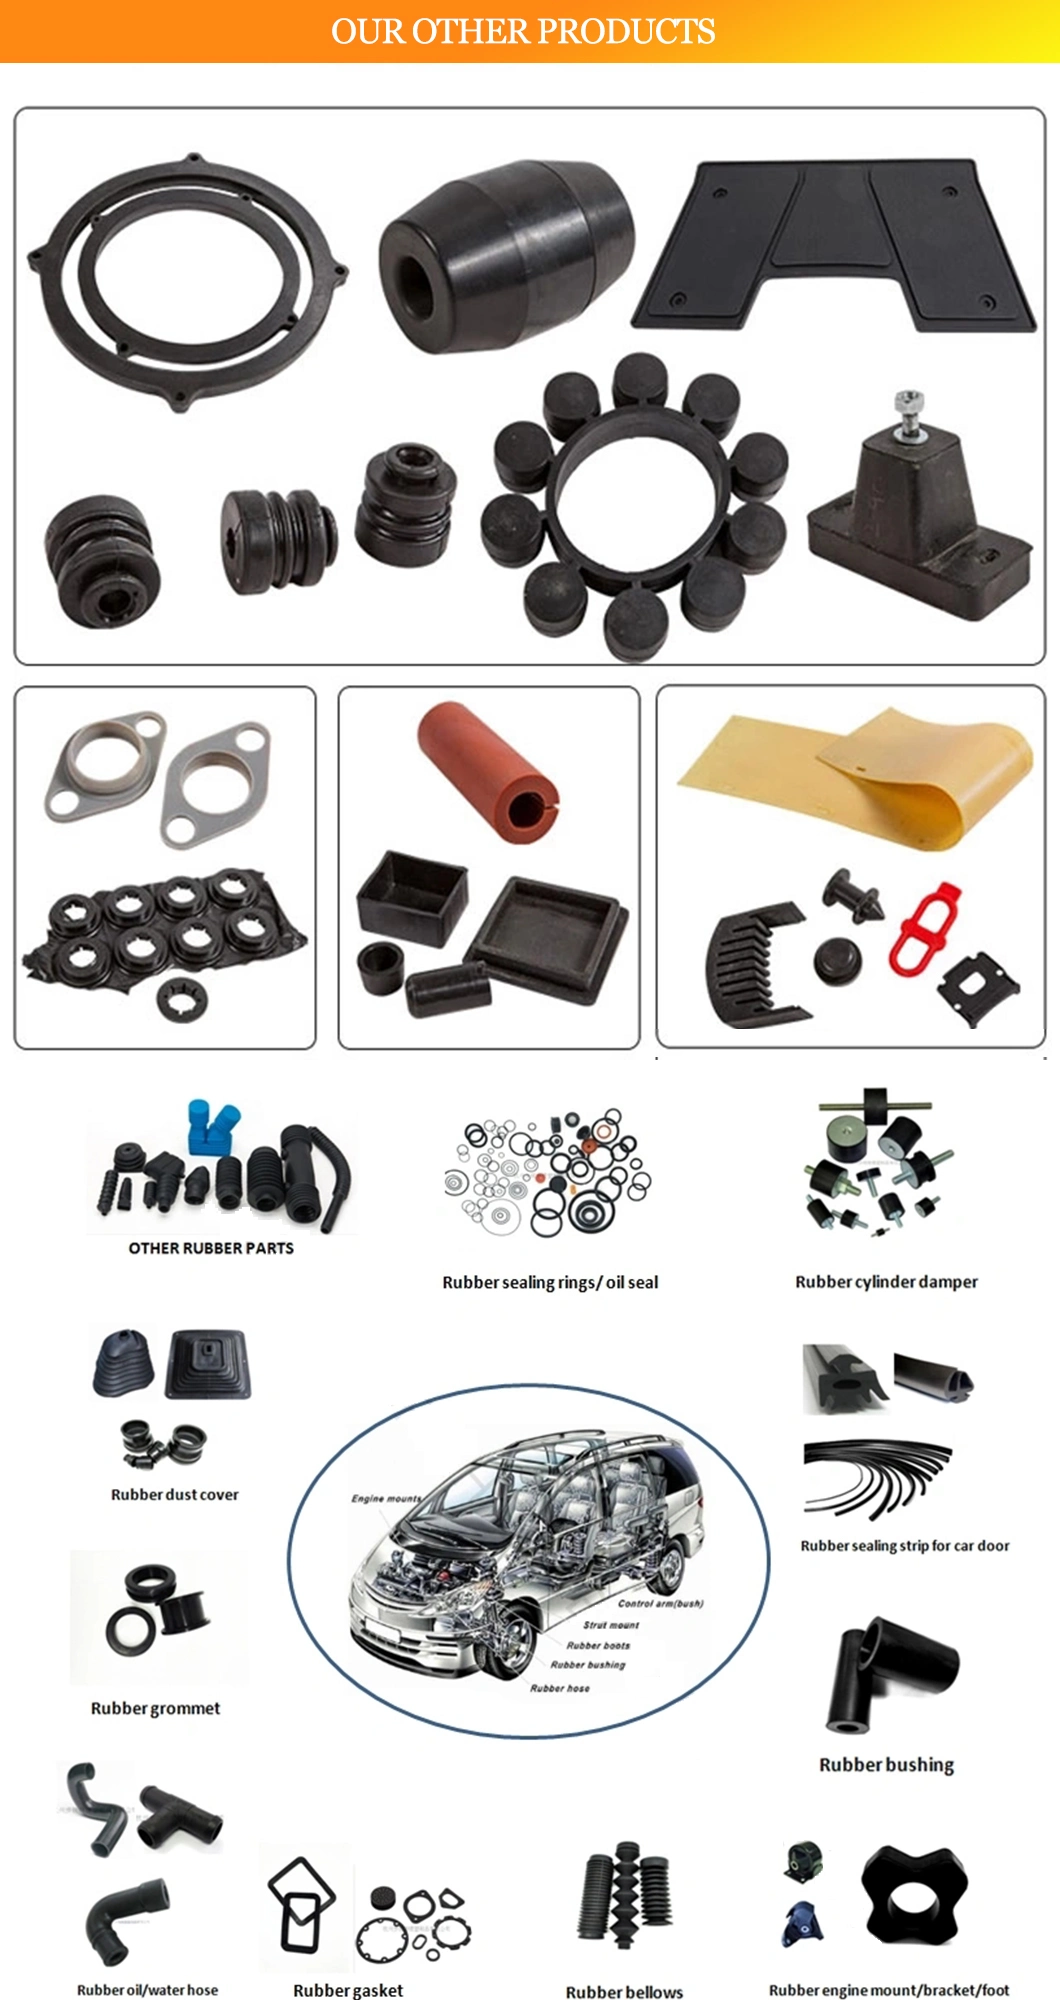 Customized Rubber Products Parts Rubber Made in China Customized Rubber Molded Products